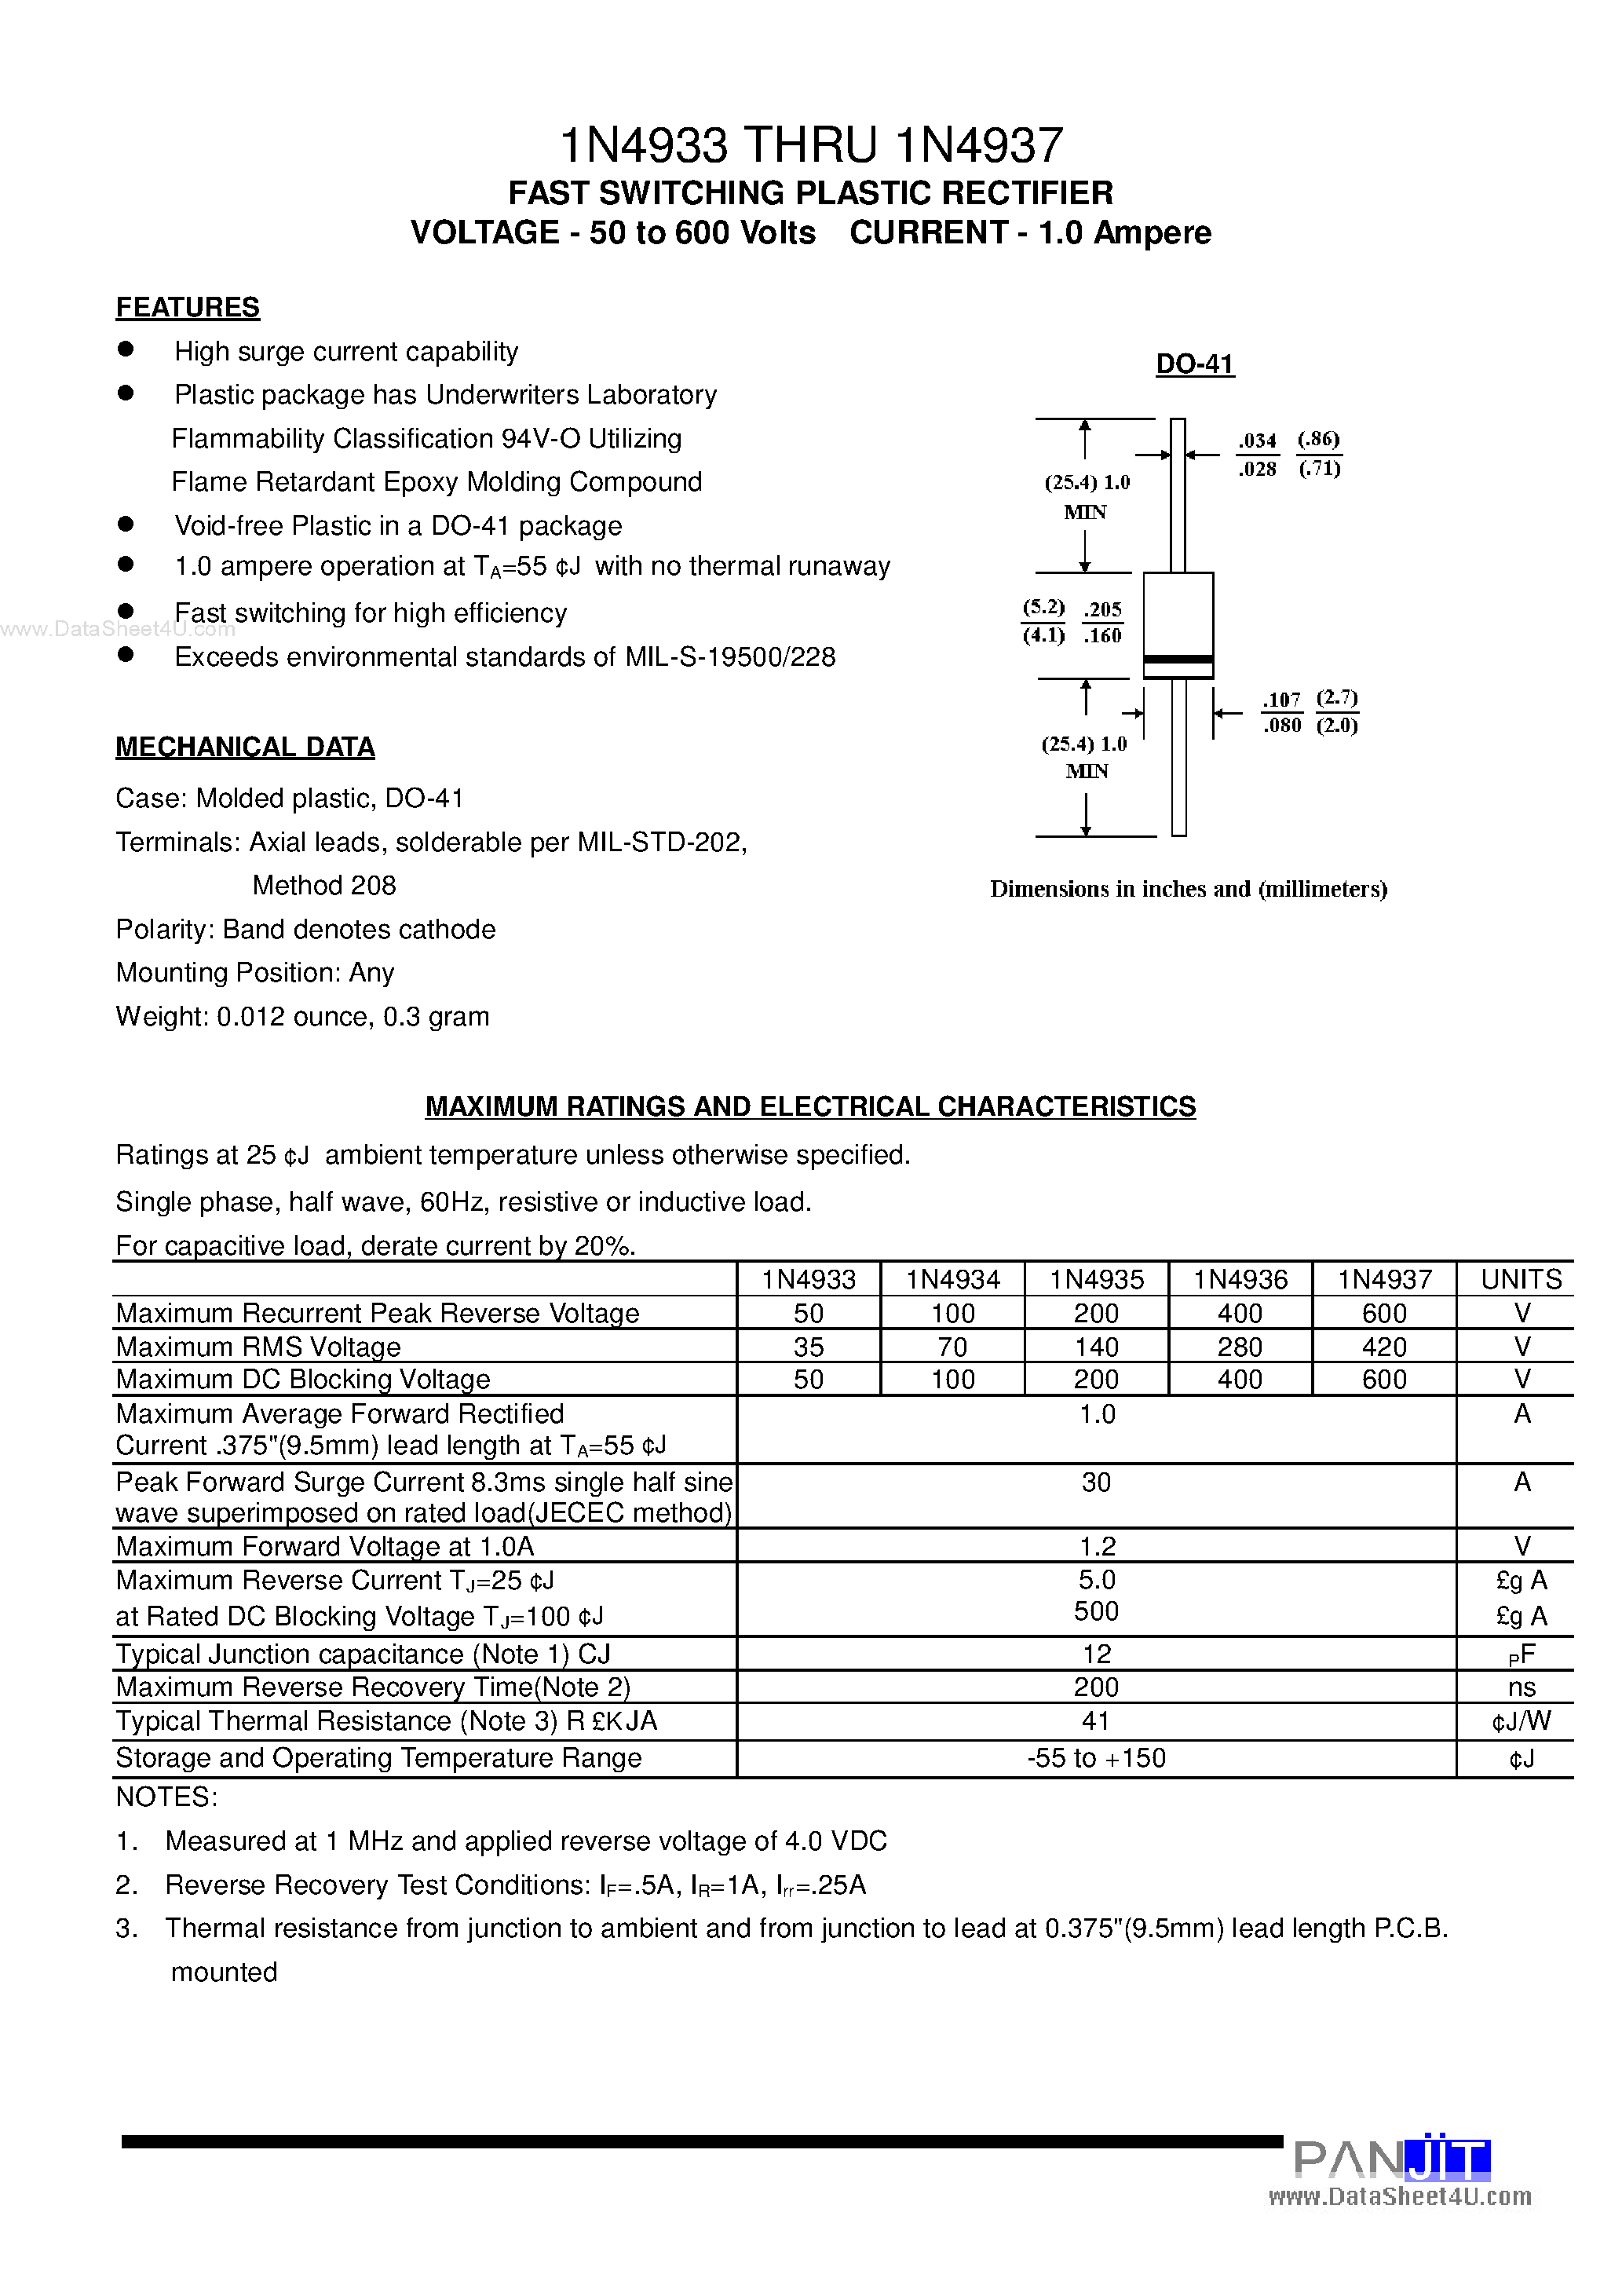 Datasheet IN4933 - (IN4933 - IN4937) FAST SWITCHING PLASTIC RECTIFIER page 1